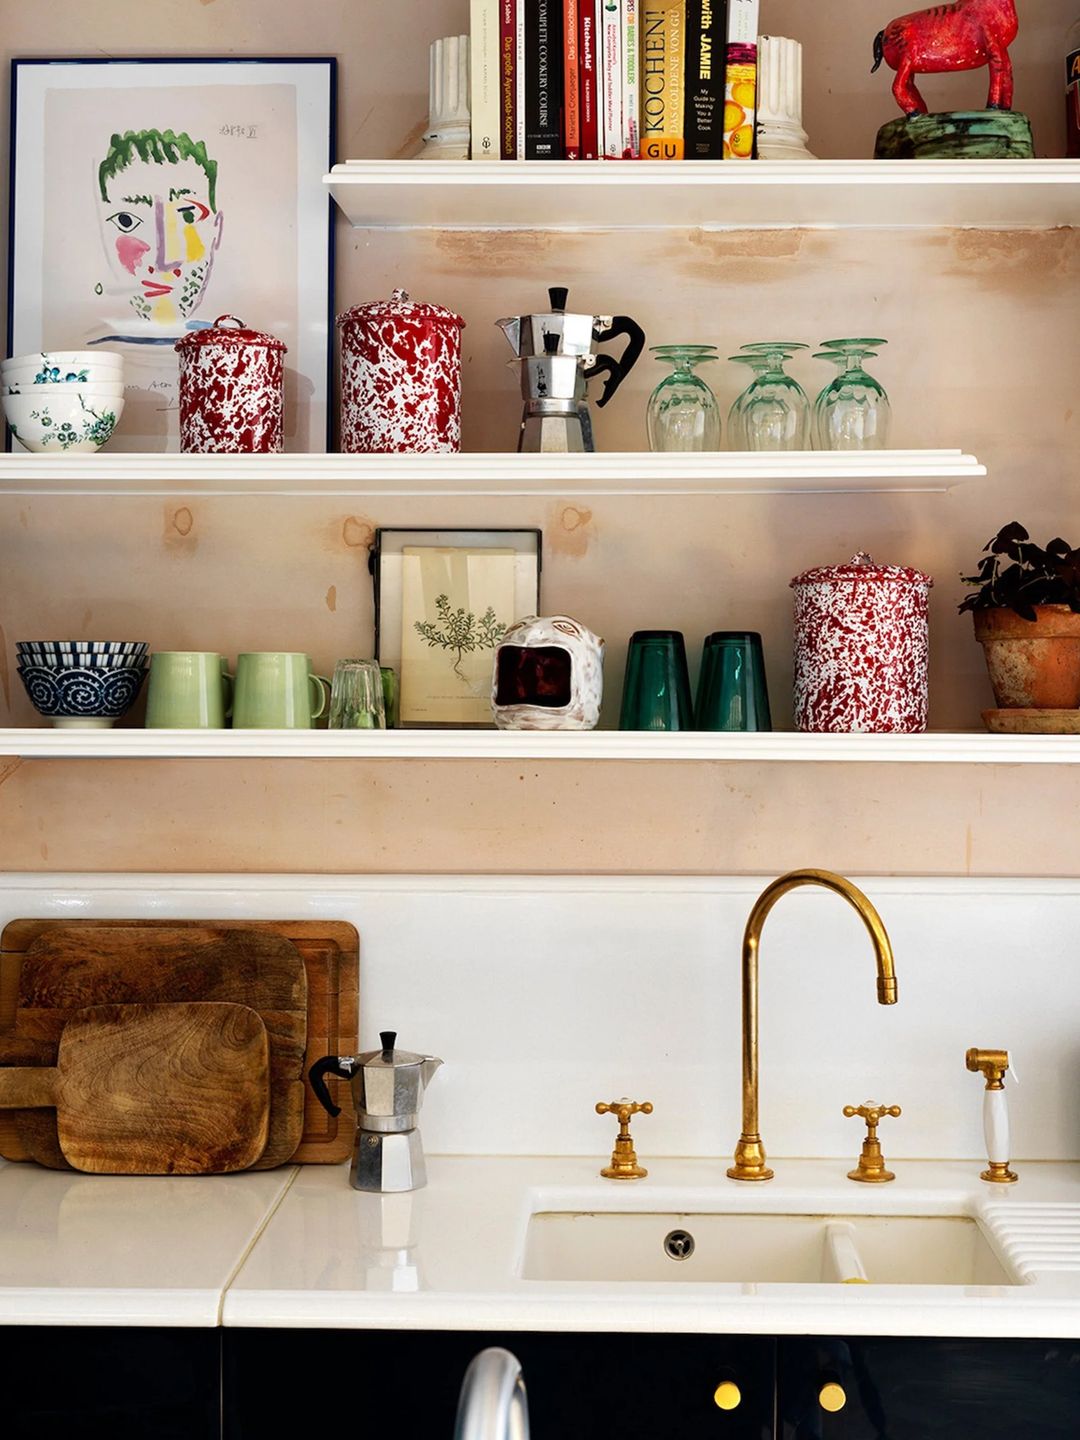 For a kitsch kitchen, look no further than the work of Beata Heuman